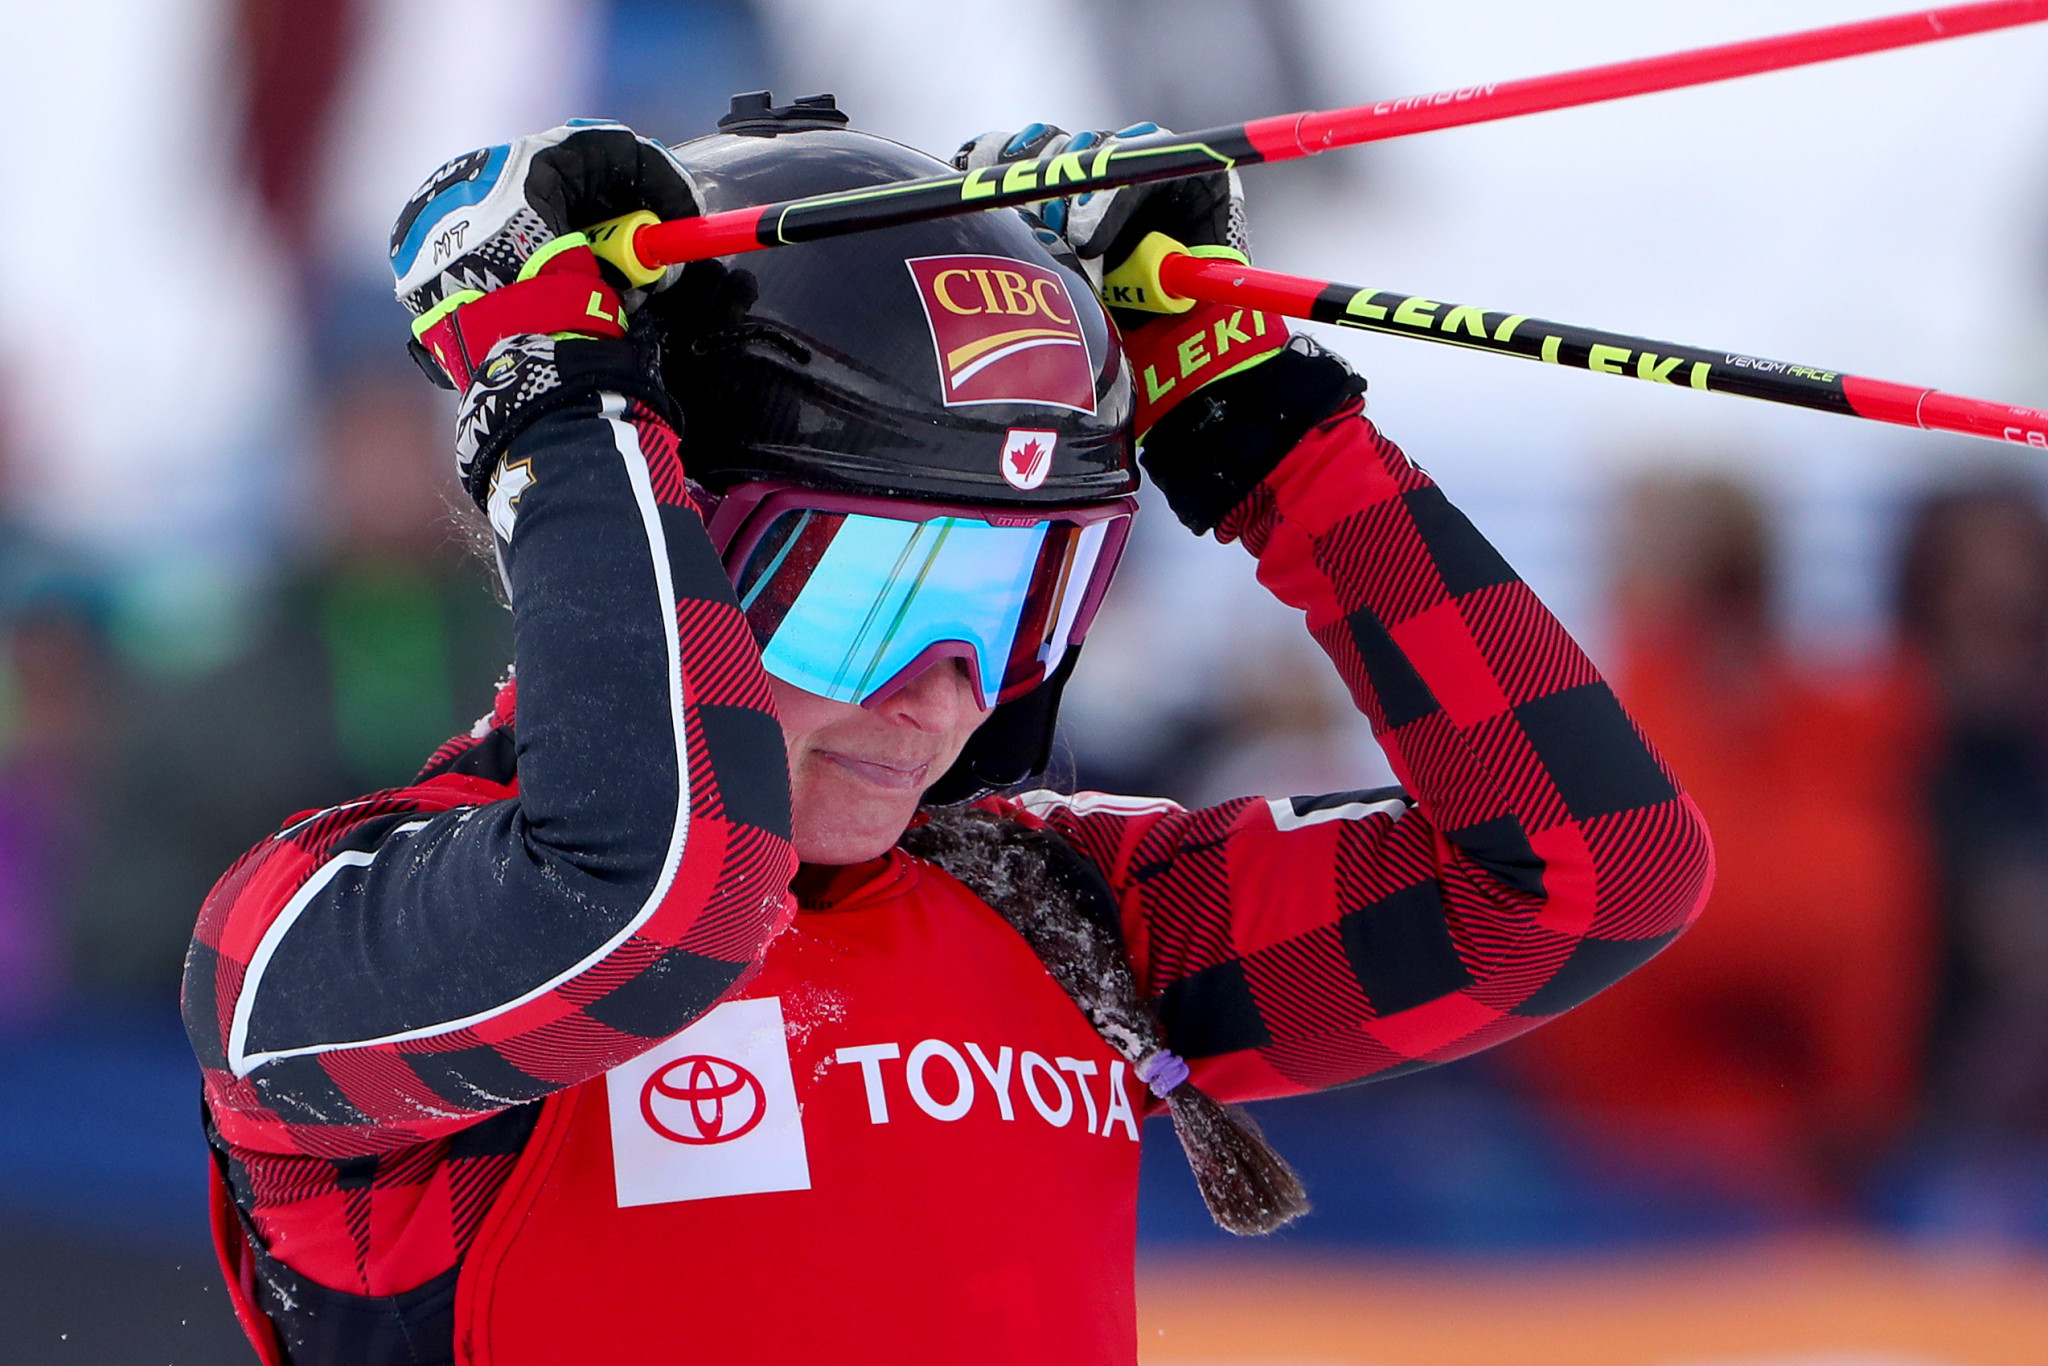 Newly crowned world champion Marielle Thompson of Canada could only finish second in the women's qualifying at the FIS Ski Cross World Cup in Feldberg ©Getty Images